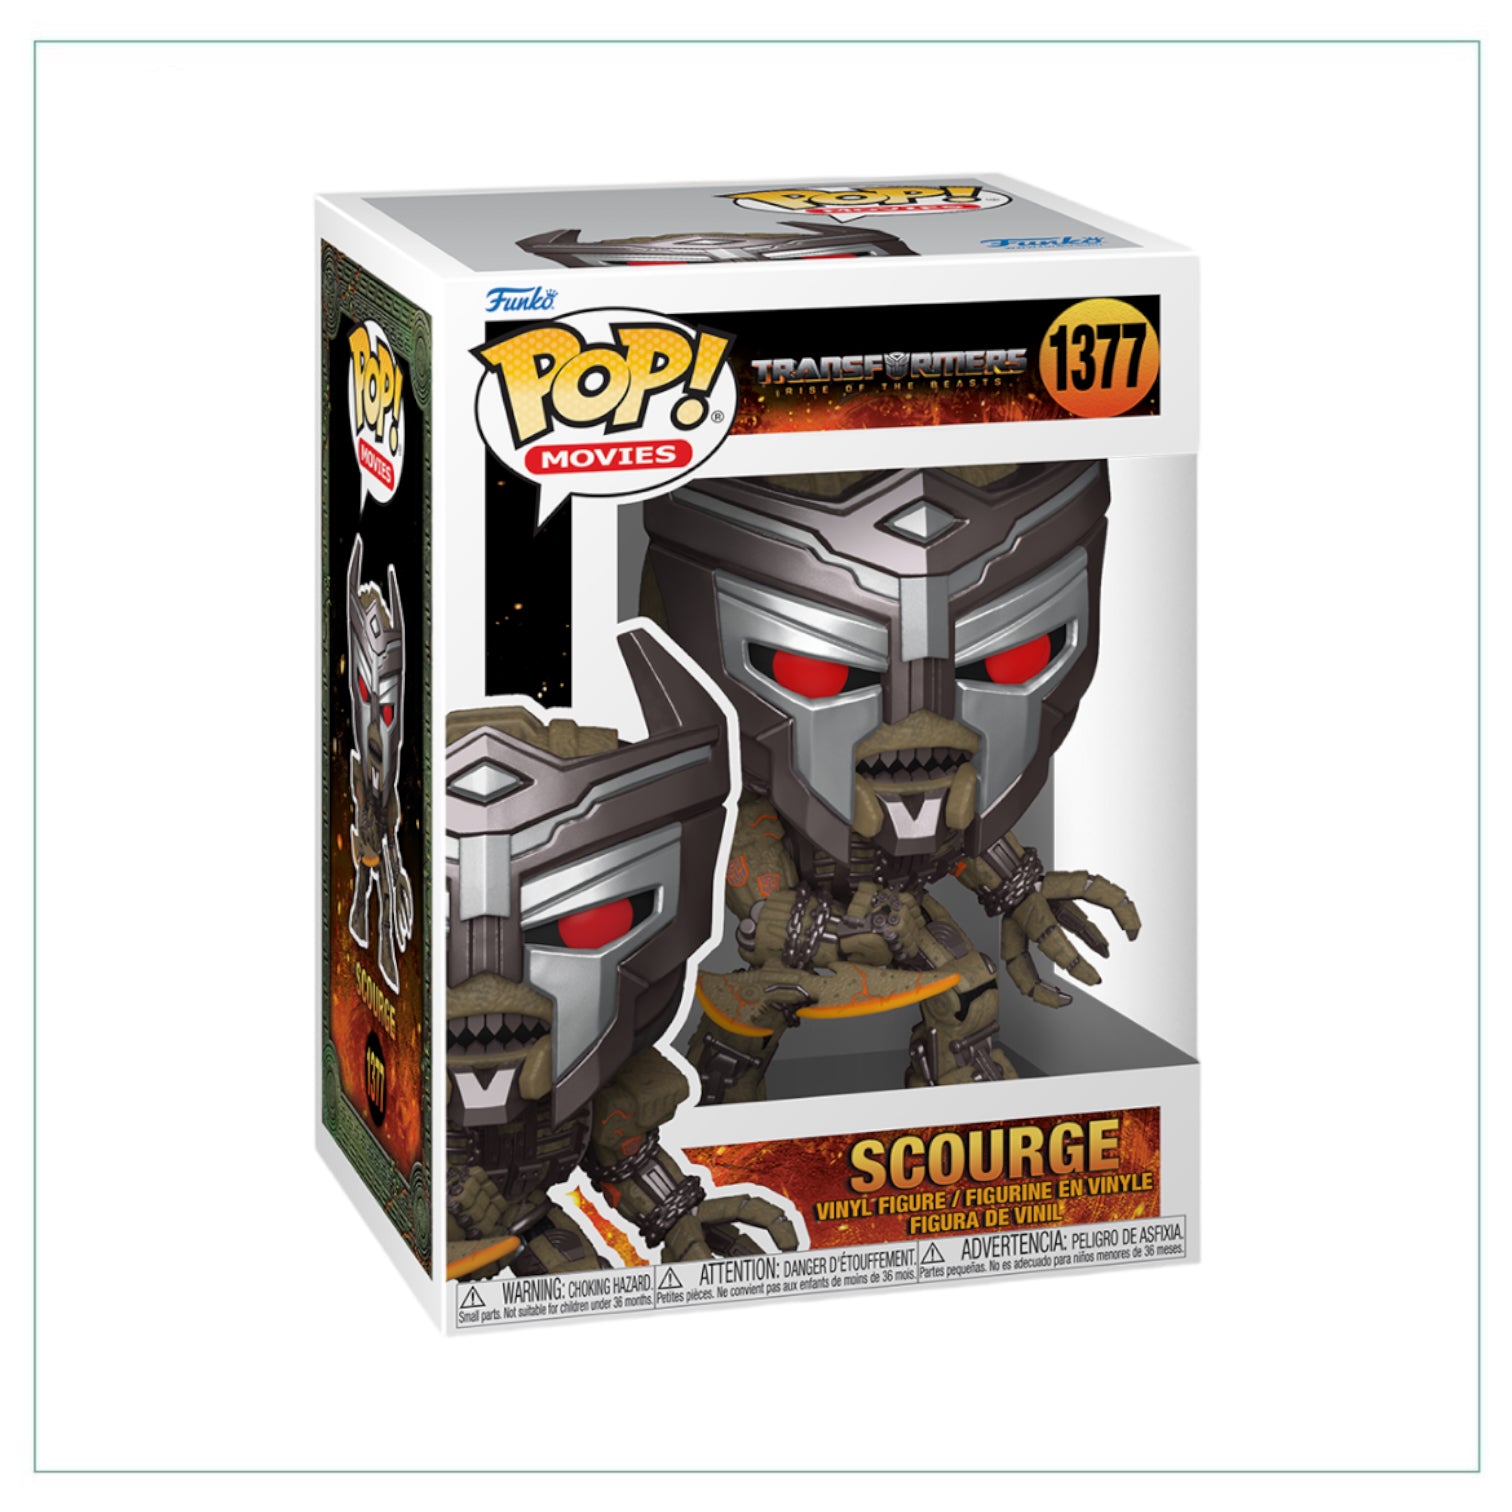 Scourge #1377 Funko Pop! Transformers Rise of the Beasts